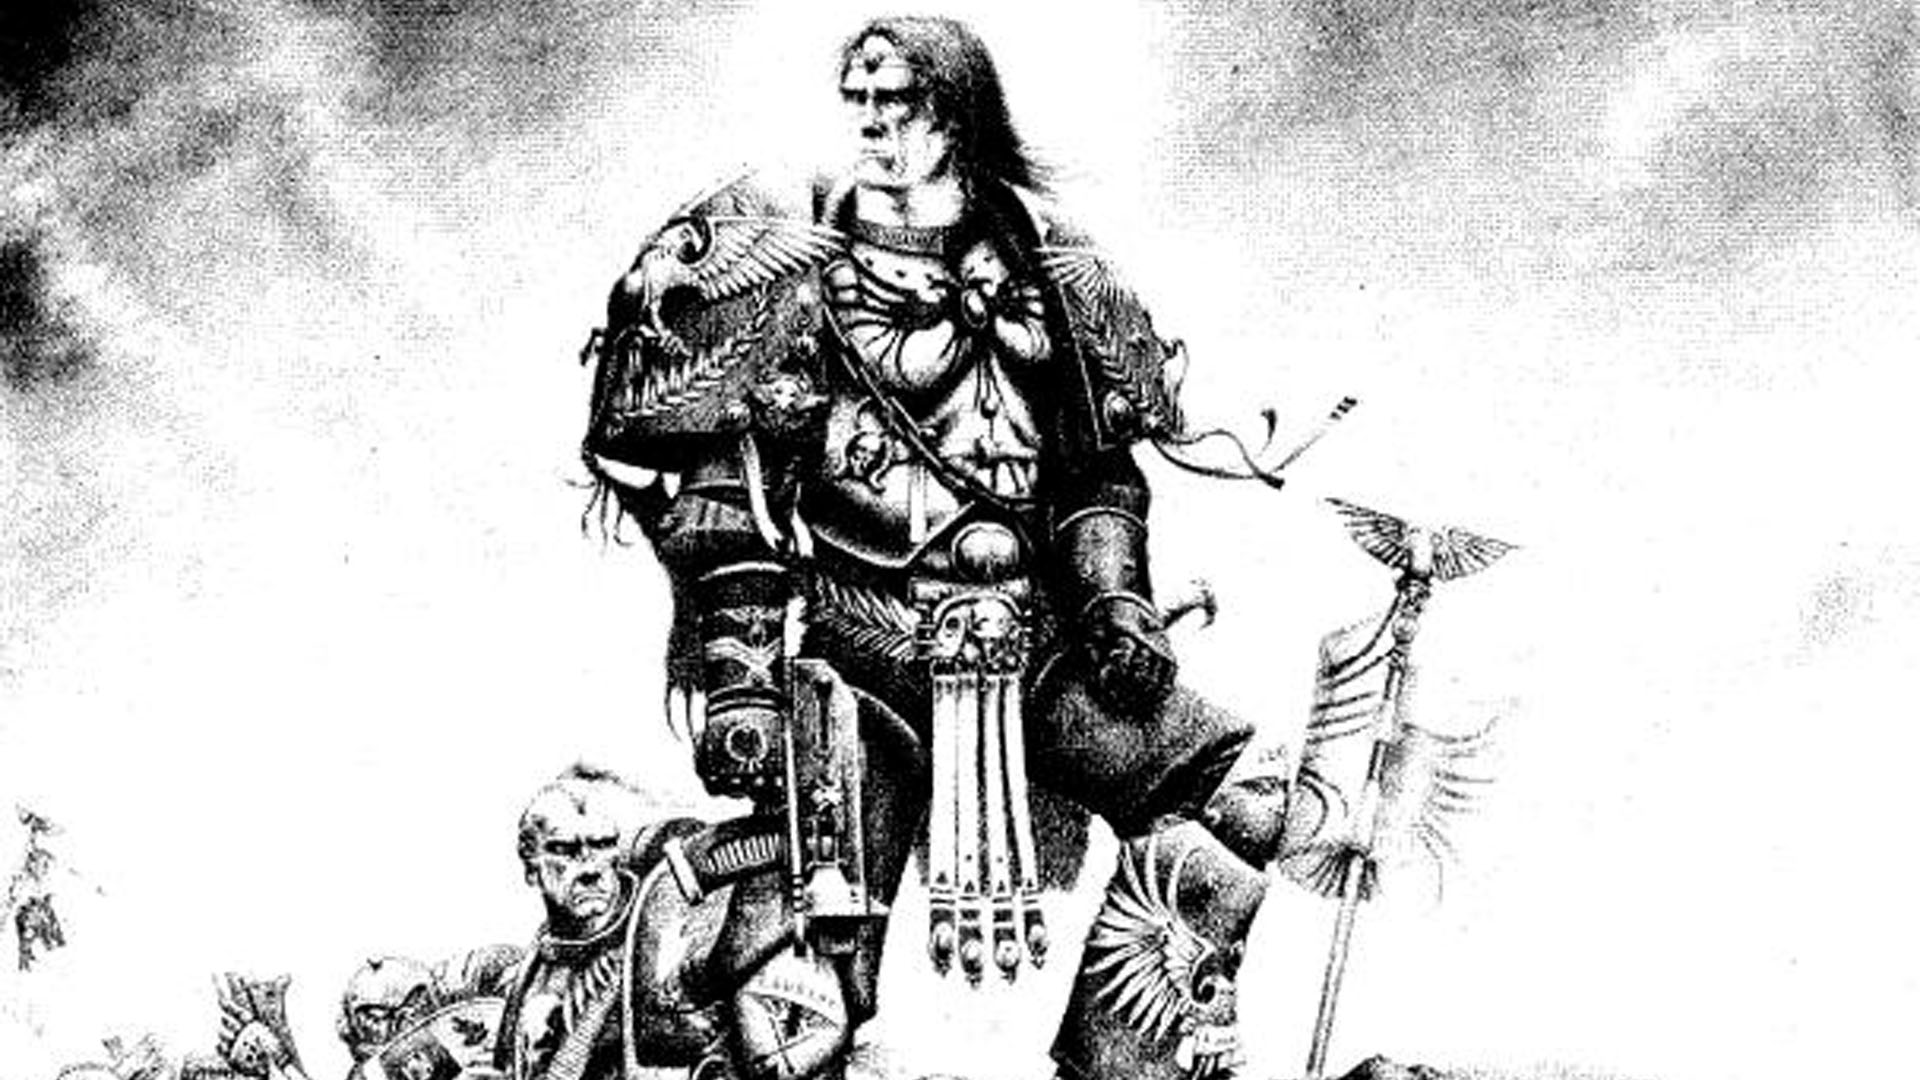 Warhammer 40k Emperor of Mankind guide - Games Workshop artwork showing the Emperor during the Unification Wars, standing on a pile of corpses